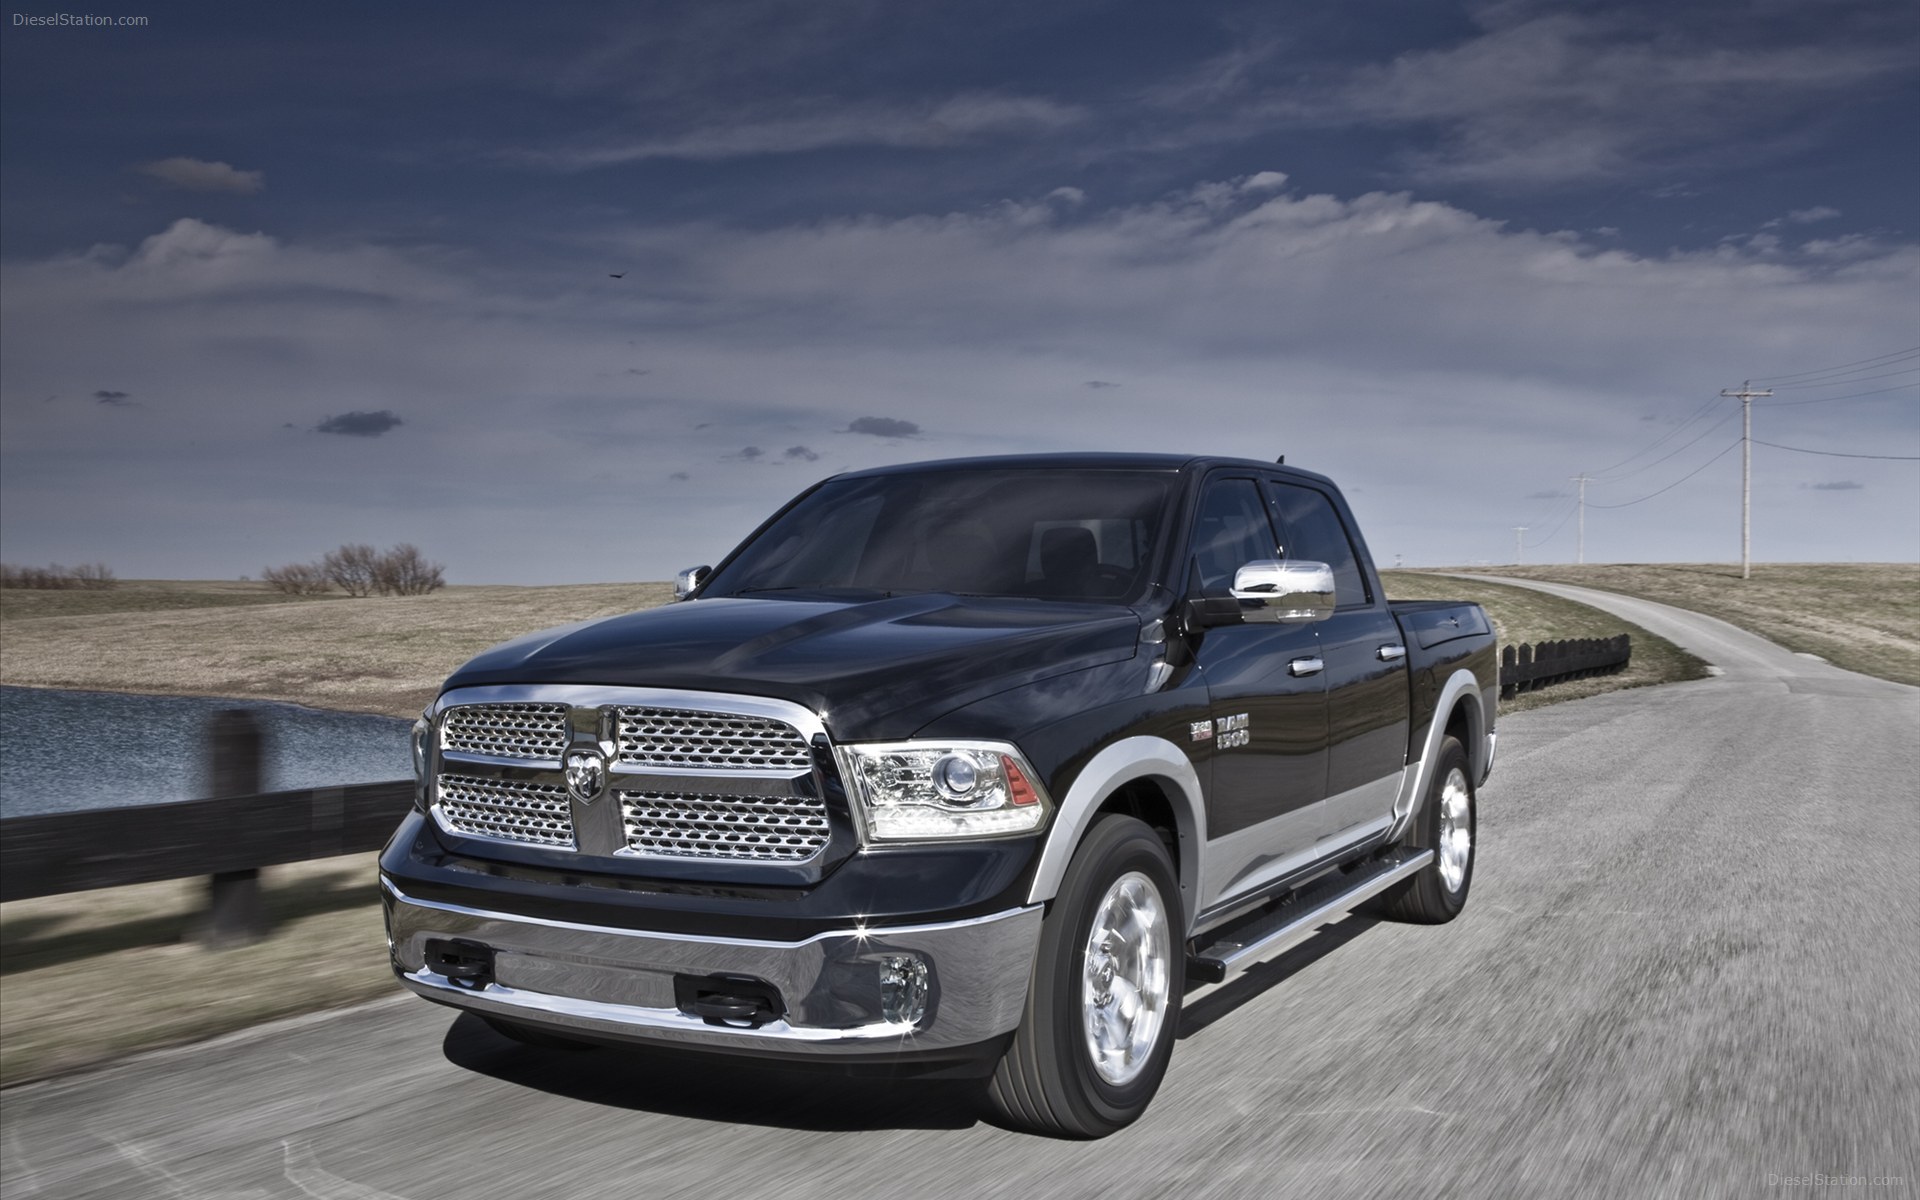 Dodge Ram Widescreen Exotic Car Pictures Of